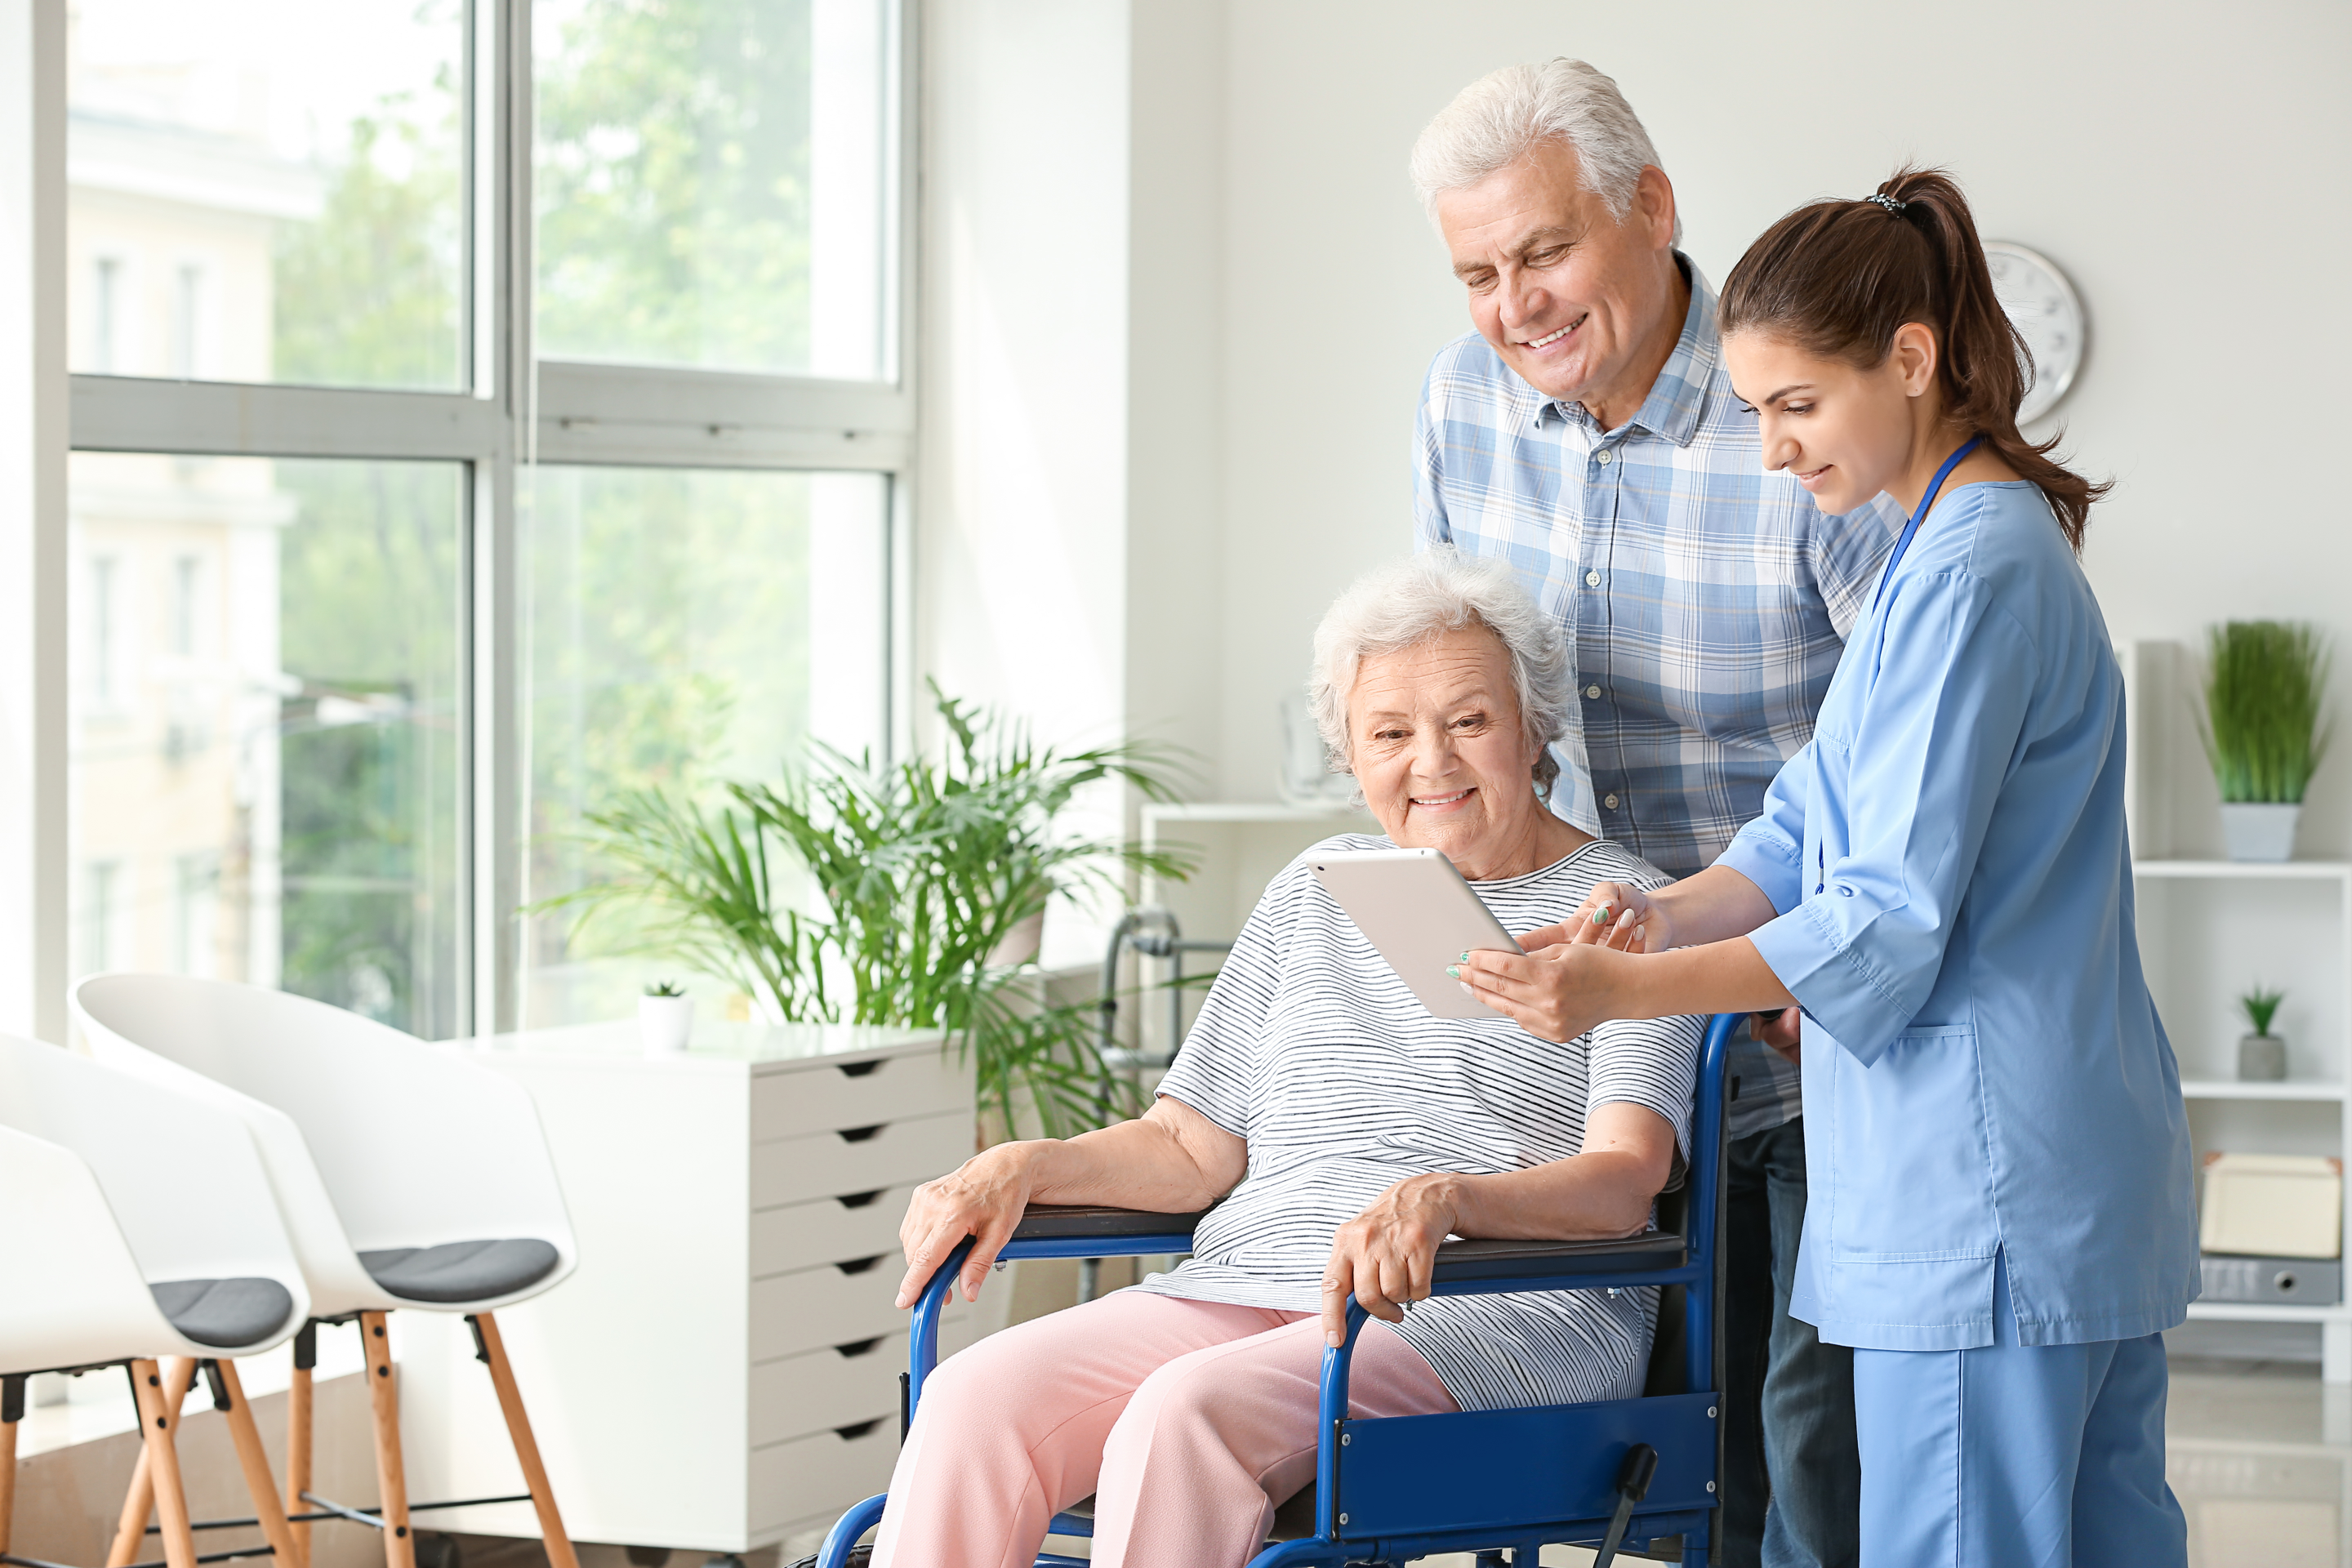 Tips on Advocating for Quality Care in Nursing Homes